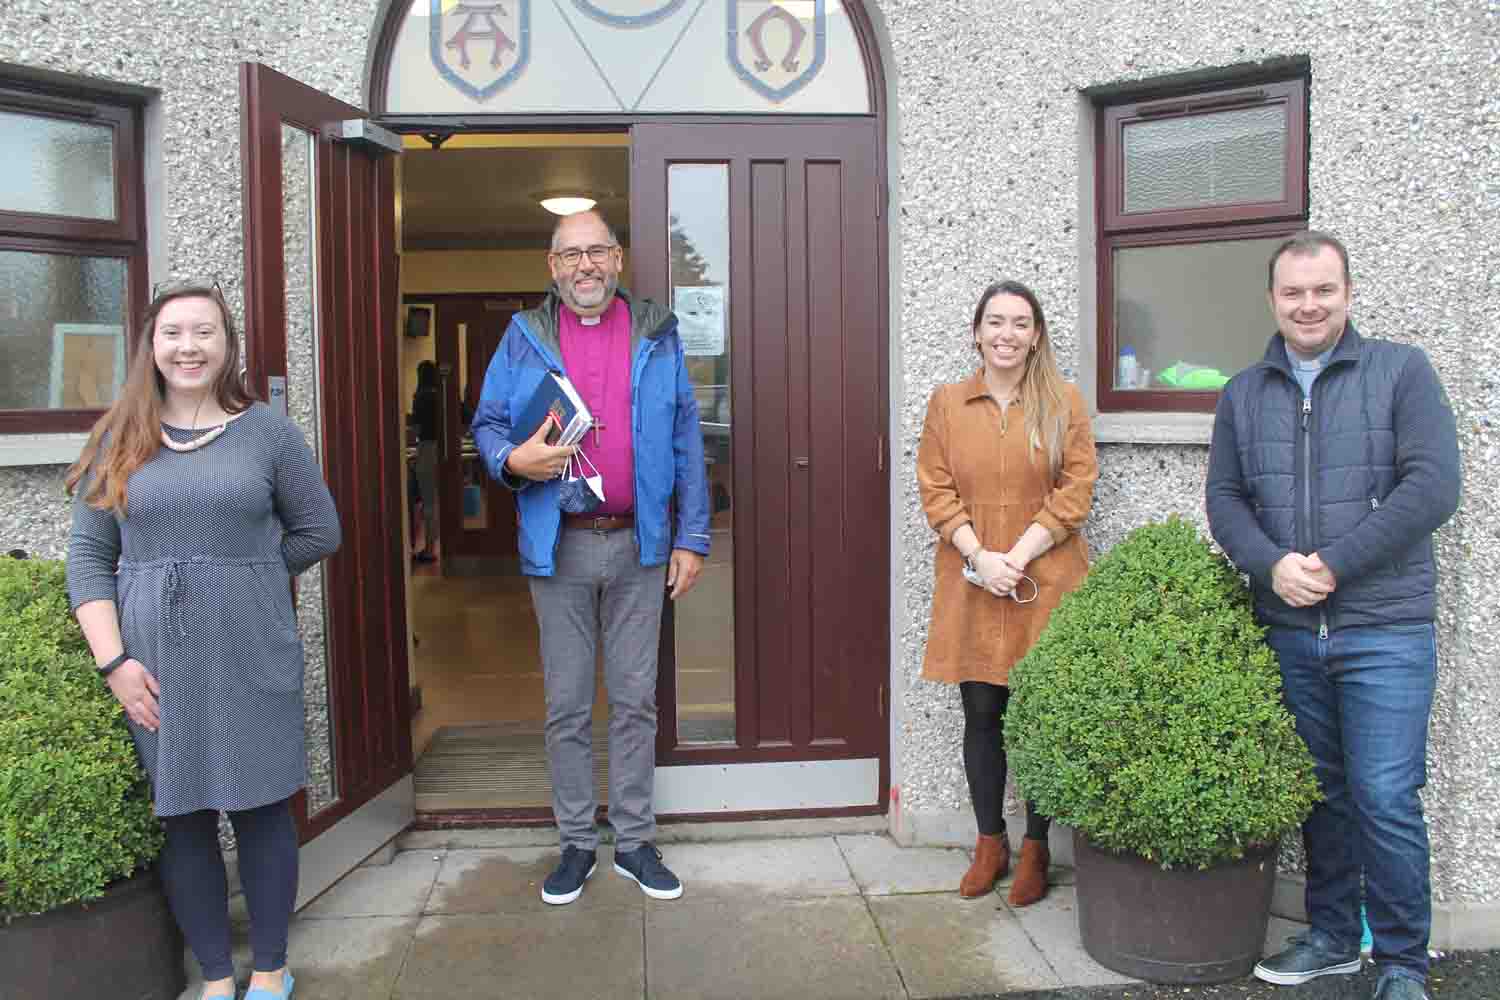 Connor Youth Officer Christina Baillie; Bishop George Davison; Children's Ministry Development Officer Victoria Jackson; and the Rev Andrew Campbell, rector of St Patrick's, Broughshane, at the Rebuild event on Saturday, September 11.